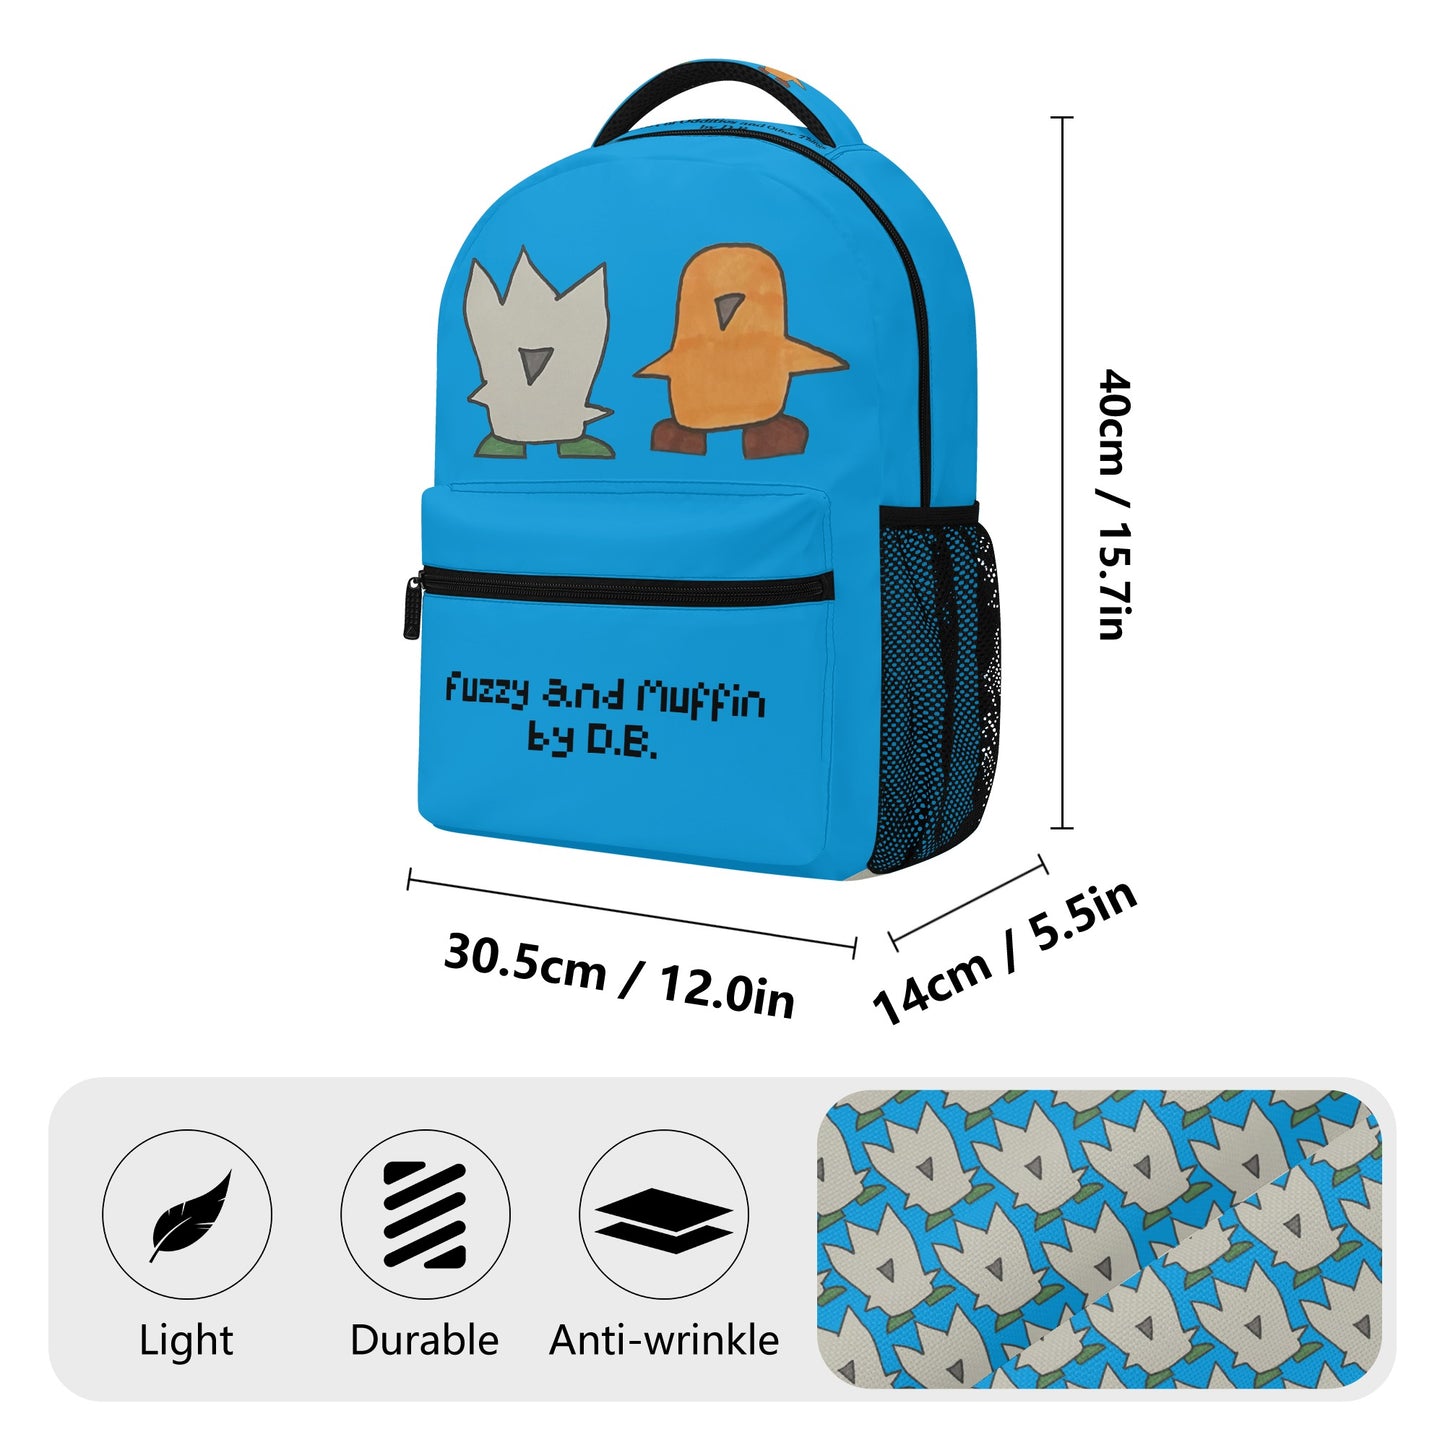 Fuzzy and Muffin Backpack (Blue)